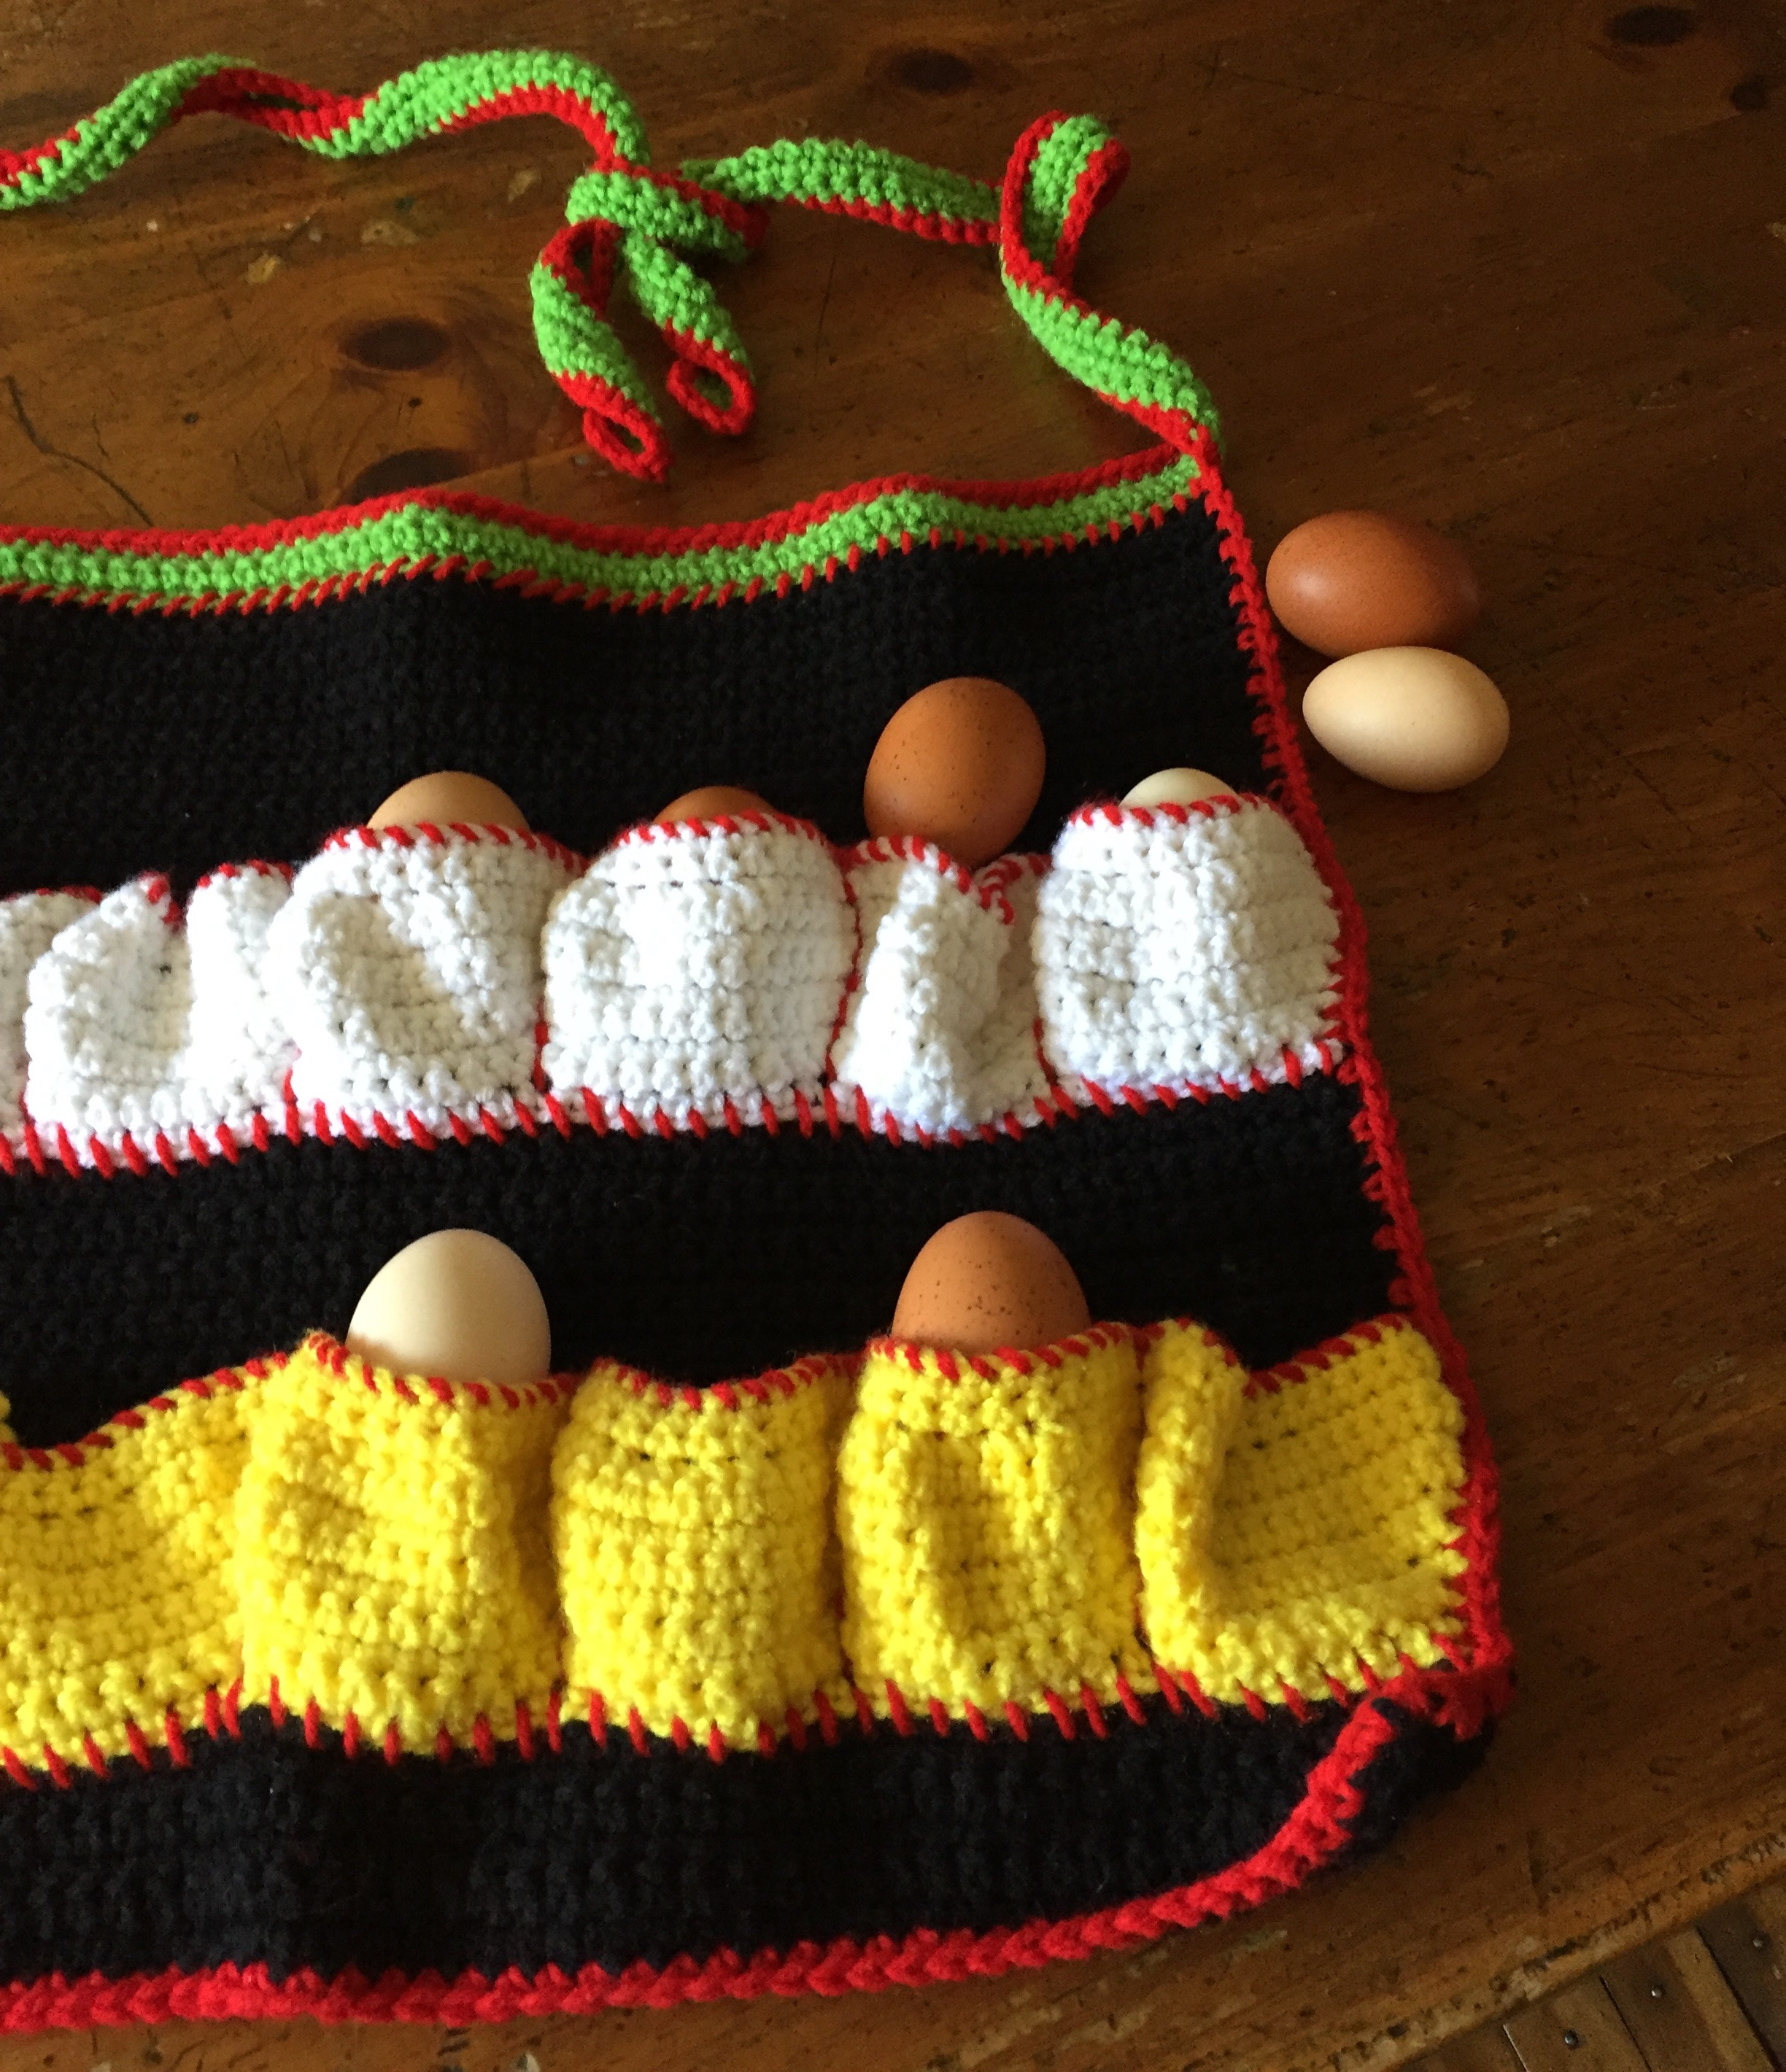 Crochet Apron Pattern Free Cheerful Crocheted Egg Gathering Apron A Review And A Deal